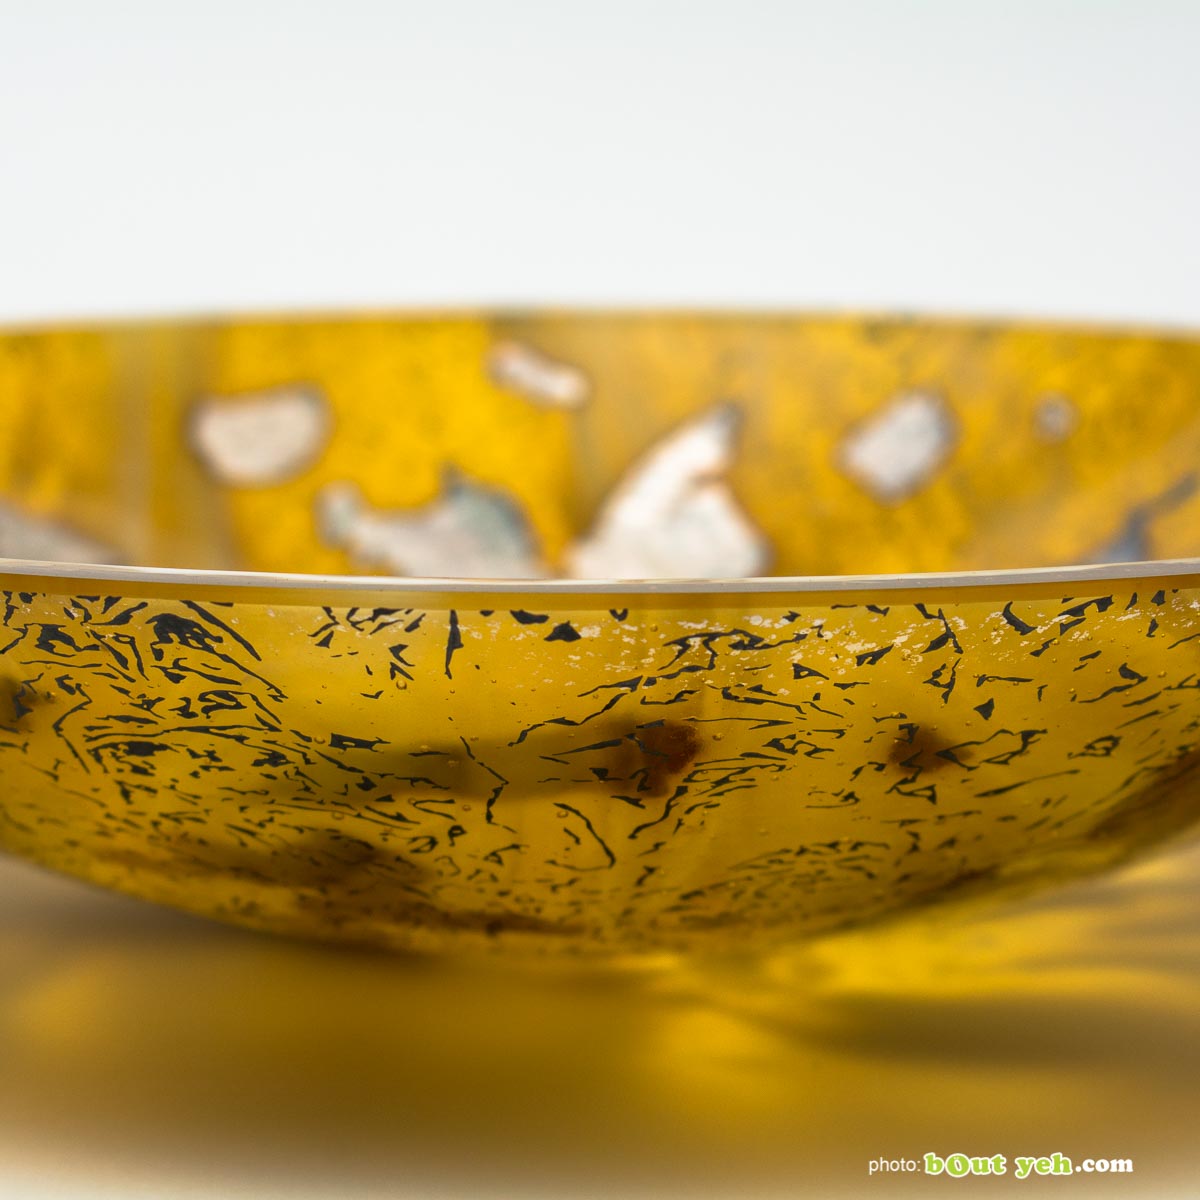 Spherical bullseye amber glass bowl with infused silver by Keith Sheppard Irish glassware - photo 1626